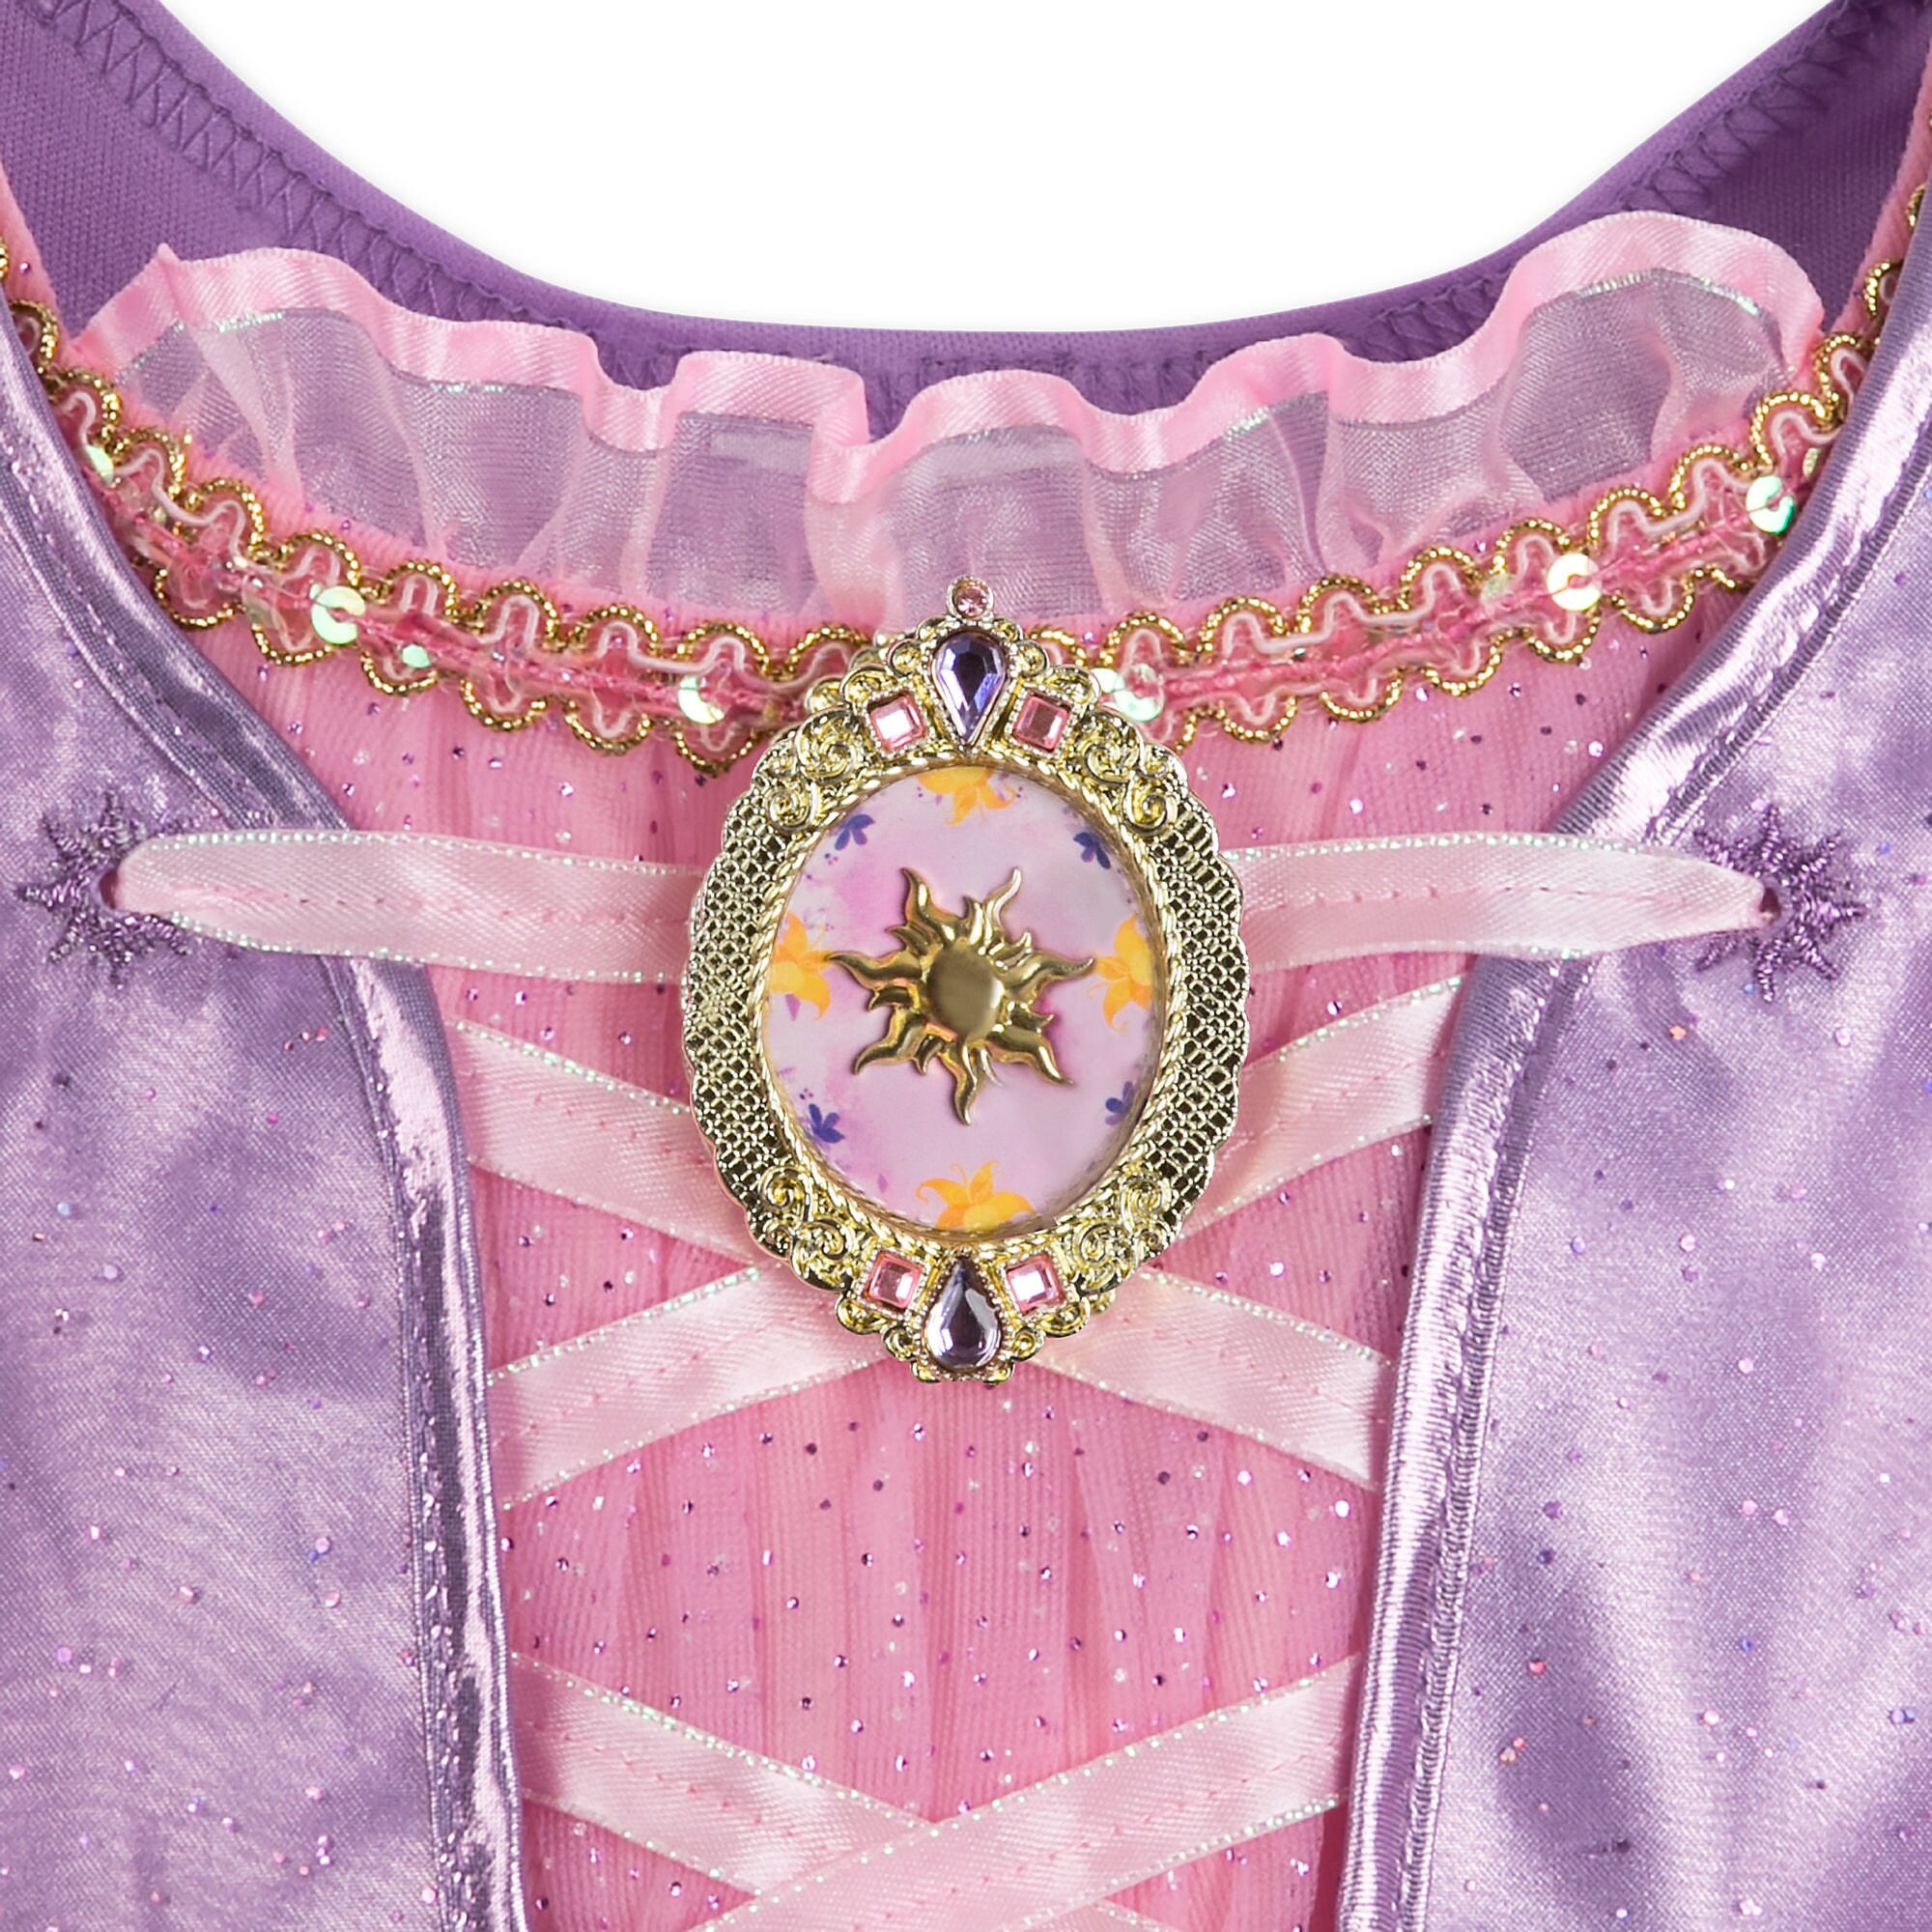 Rapunzel Costume for Kids - Tangled released today – Dis Merchandise News